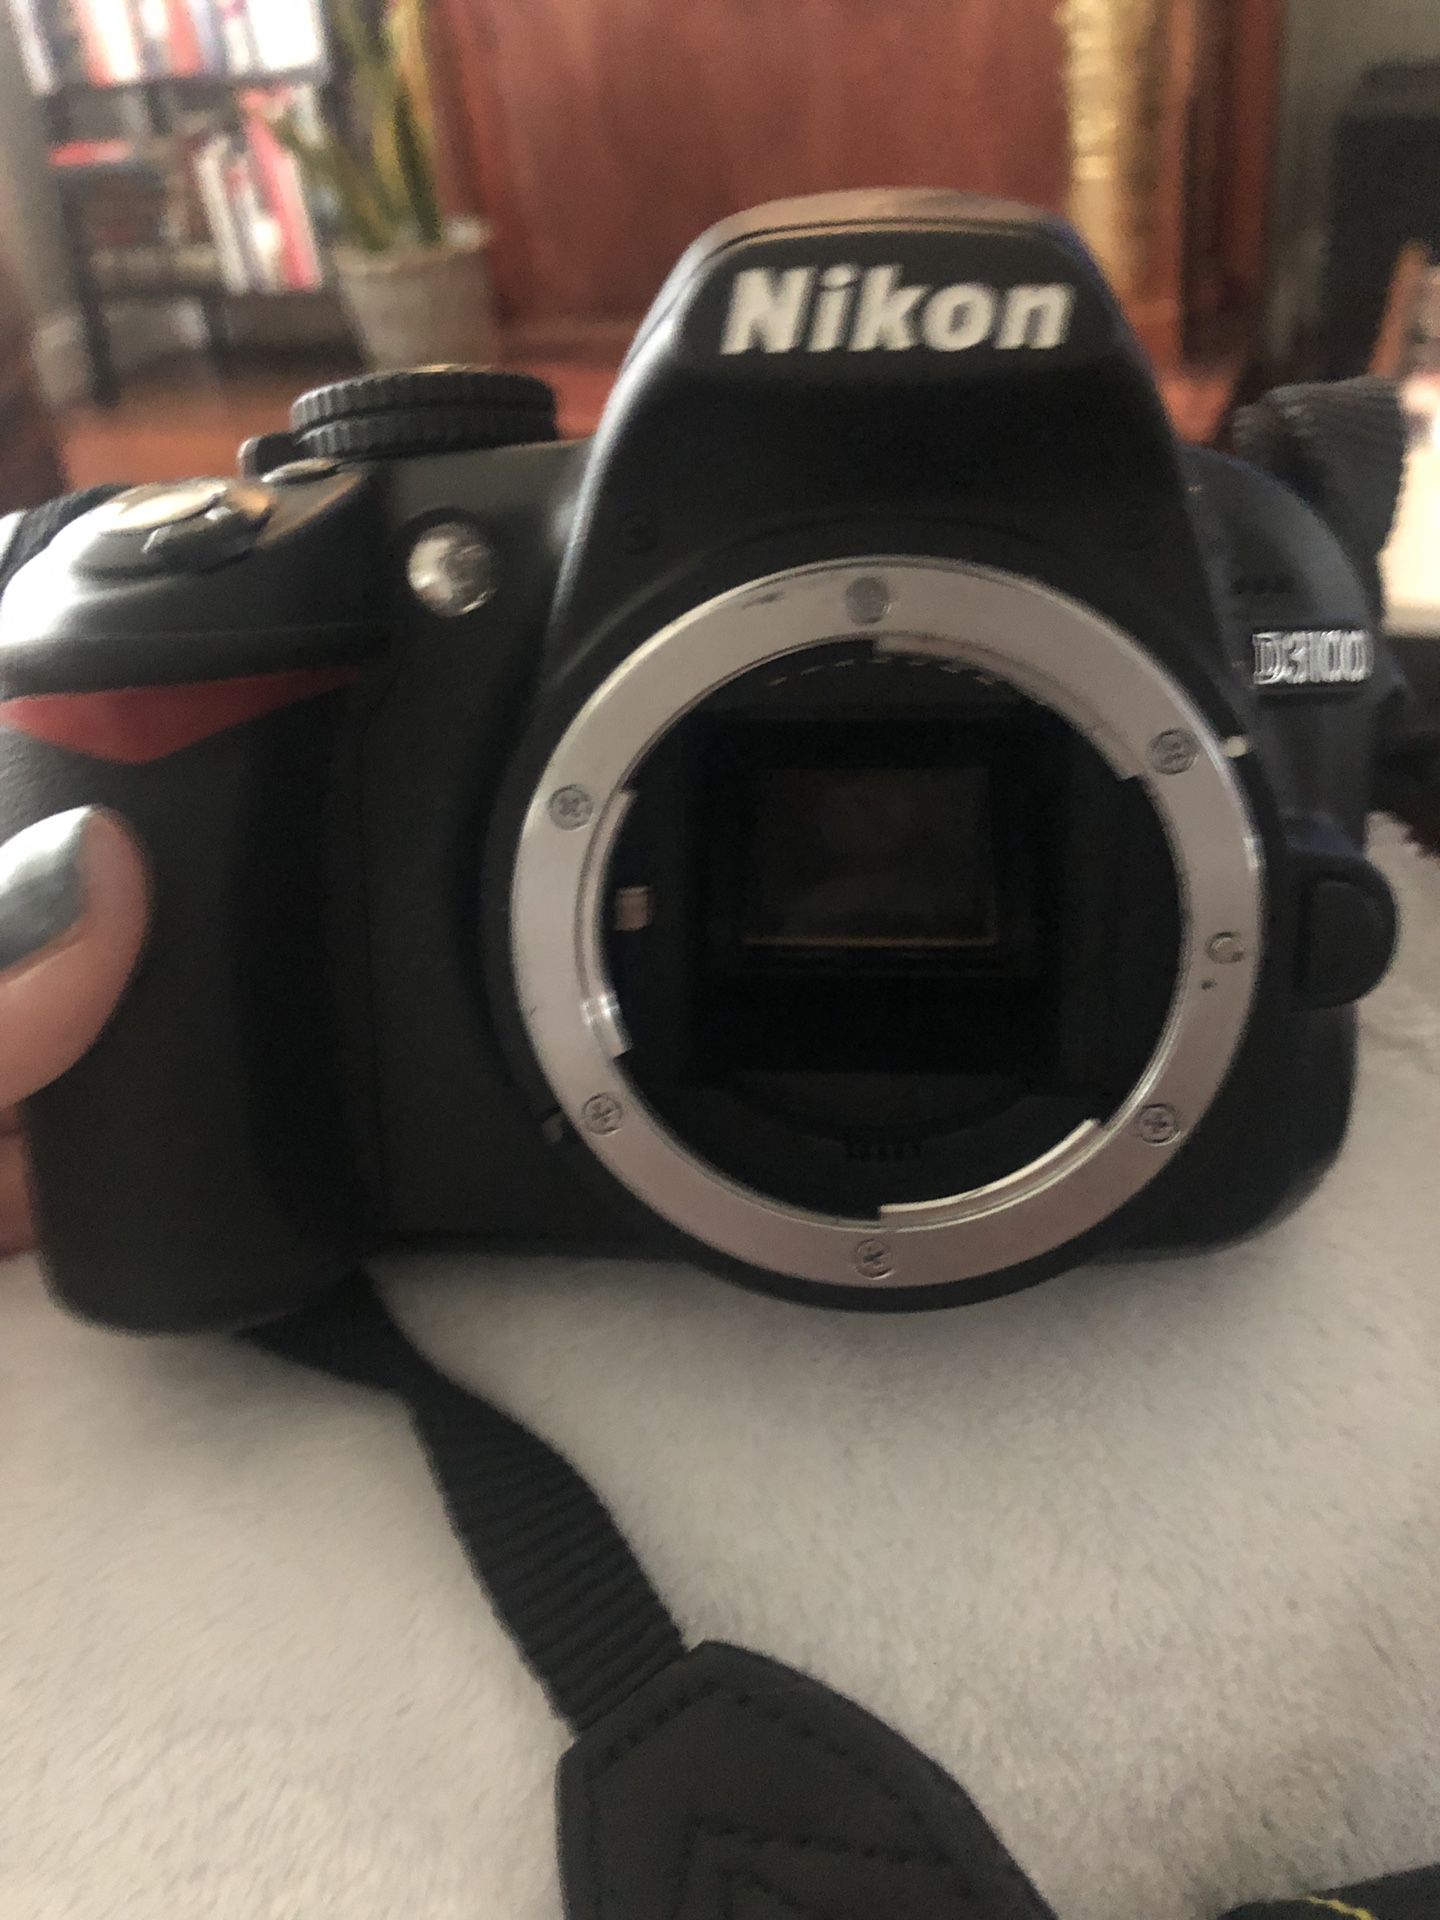 Nikon D3100, lens, case and charger